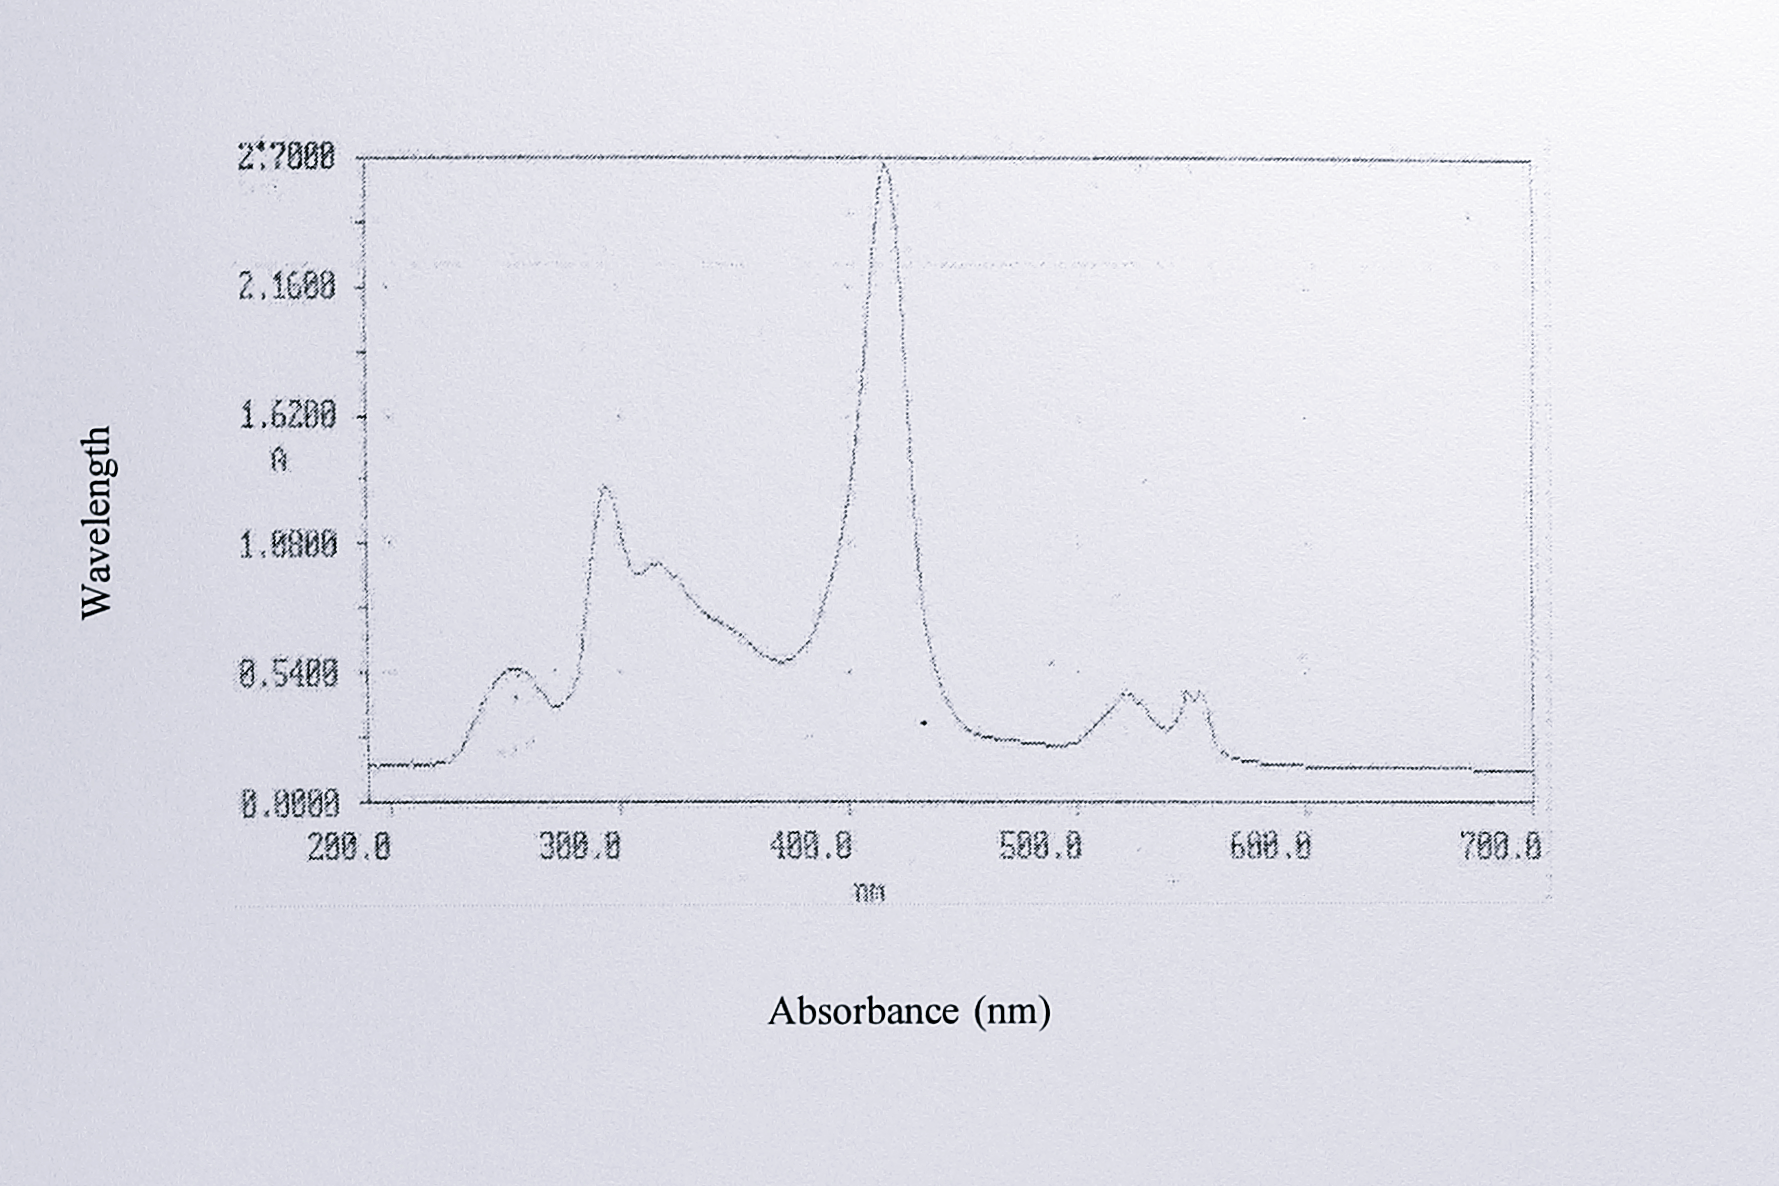 UV-visible spectrum of recombinant semi-apo cytochrome _cd_$_1$ following ion-exchange chromatography. The peak fractions (28-31) in Figure 4.12 were pooled and concentrated to approximately 200 $\mu$l. 40 $\mu$l of the concentrated material was then diluted 5-fold in 50 mM Tris-HCl pH 8.0 and the spectrum was recorded. Absorbance maxima are at 255, 294, 317, 416, 522,548 and 554 nm.